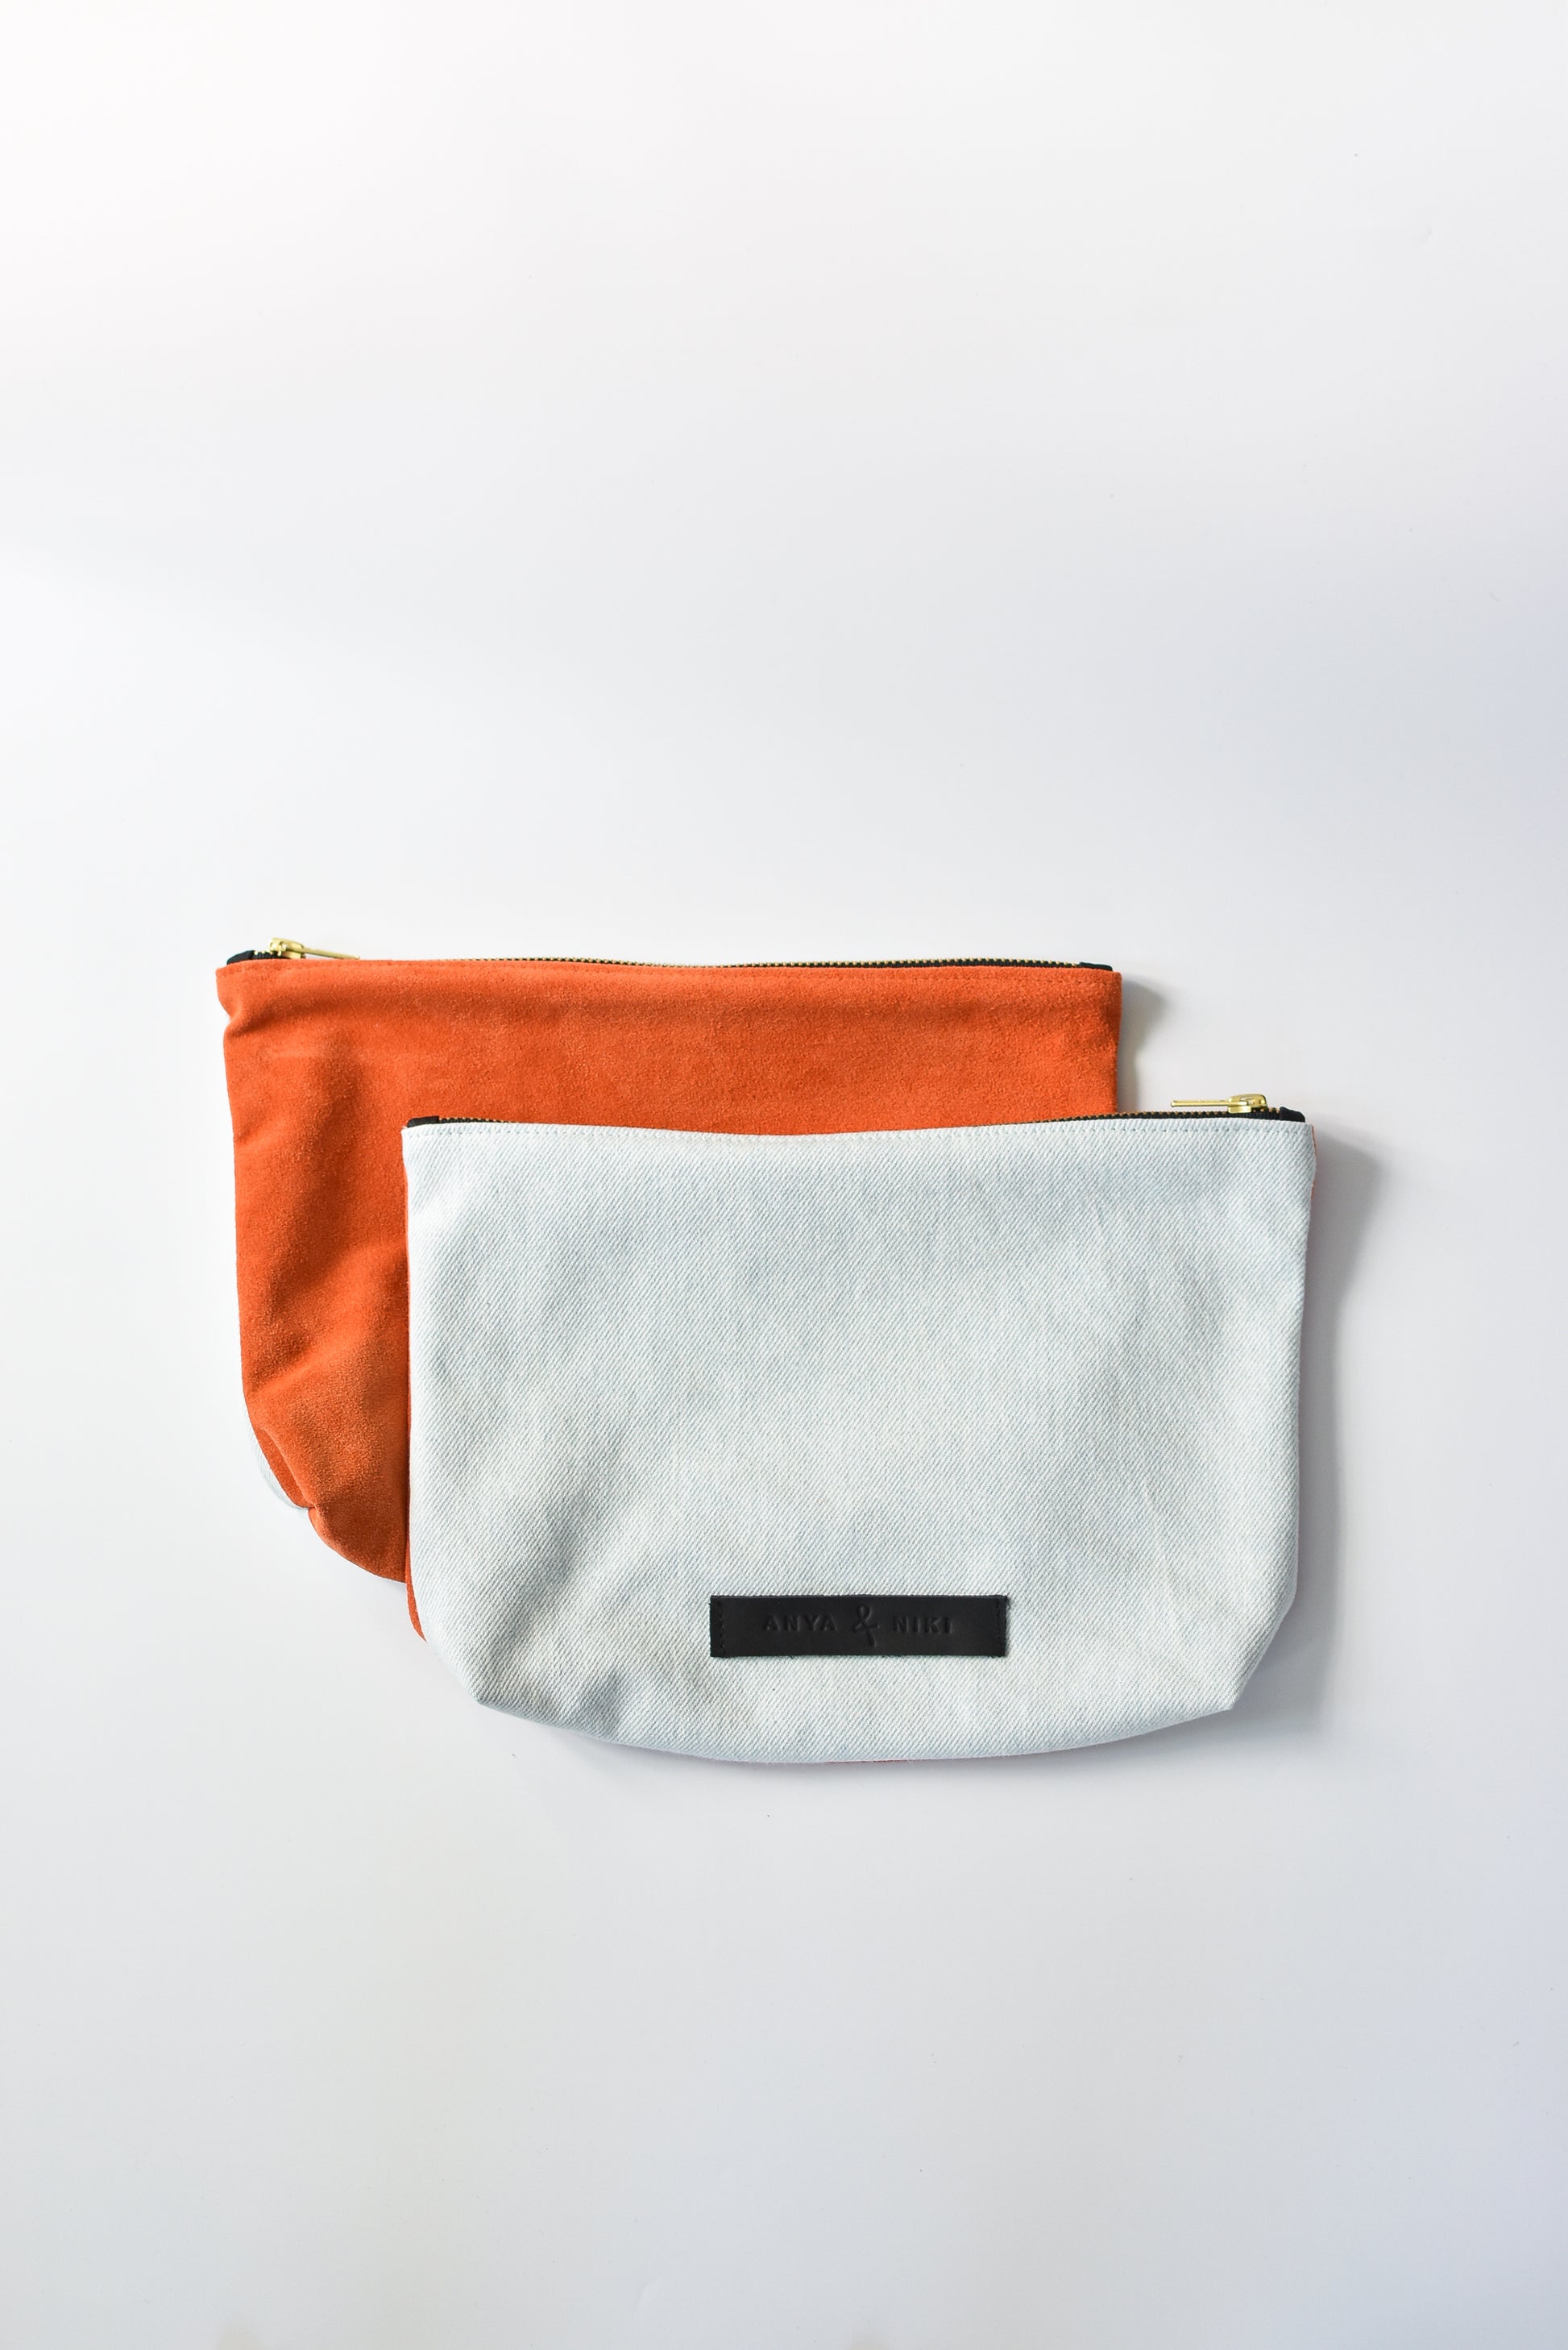 Washed denim and orange suede medium sized pouch with brass zipper and leather logo label.